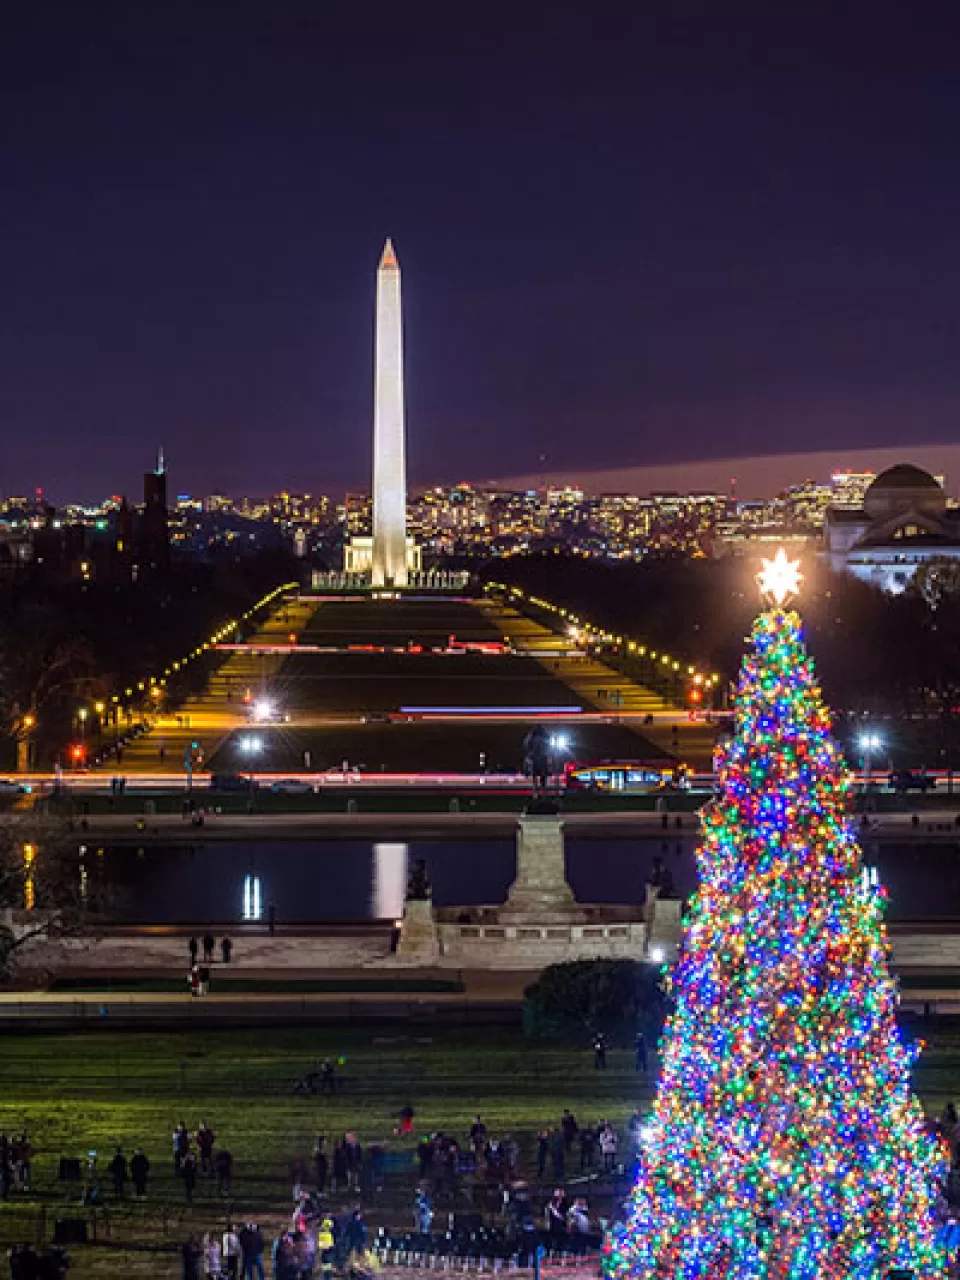 The U.S. Capitol Christmas Tree with lights on. National Mall in the distance.